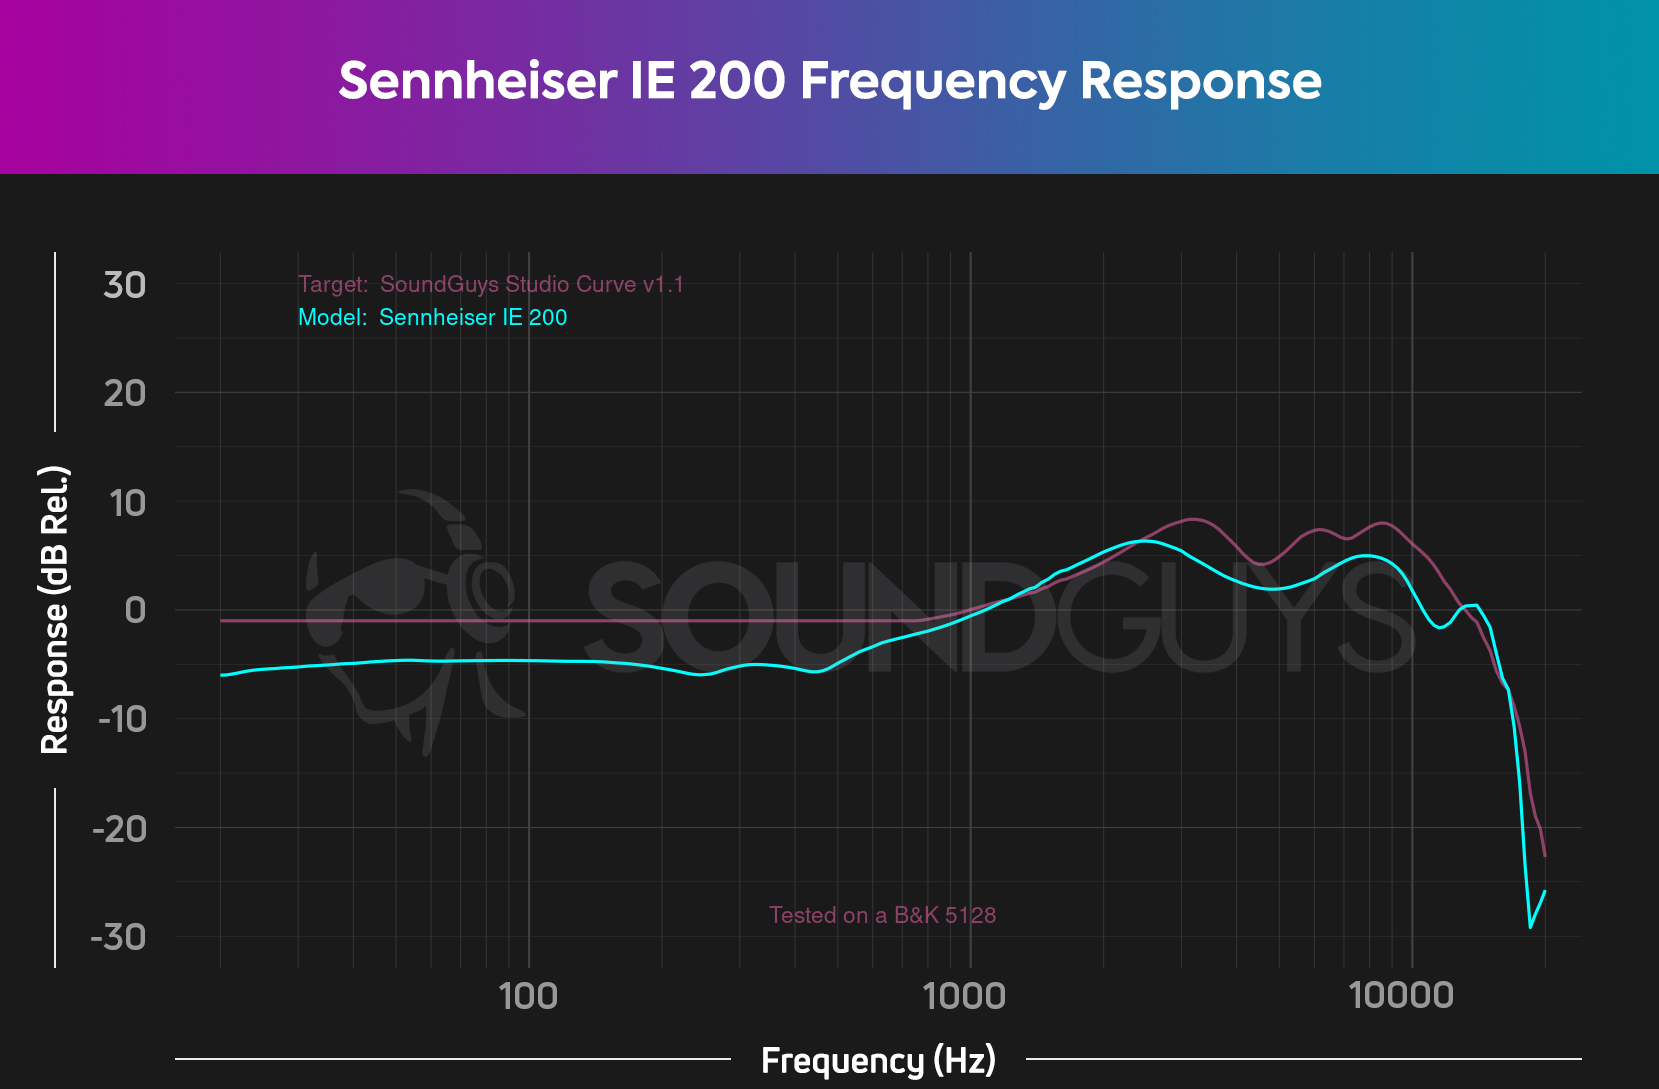 A chart depicts the frequency response of the Sennheiser IE 200 compared to our studio curve.